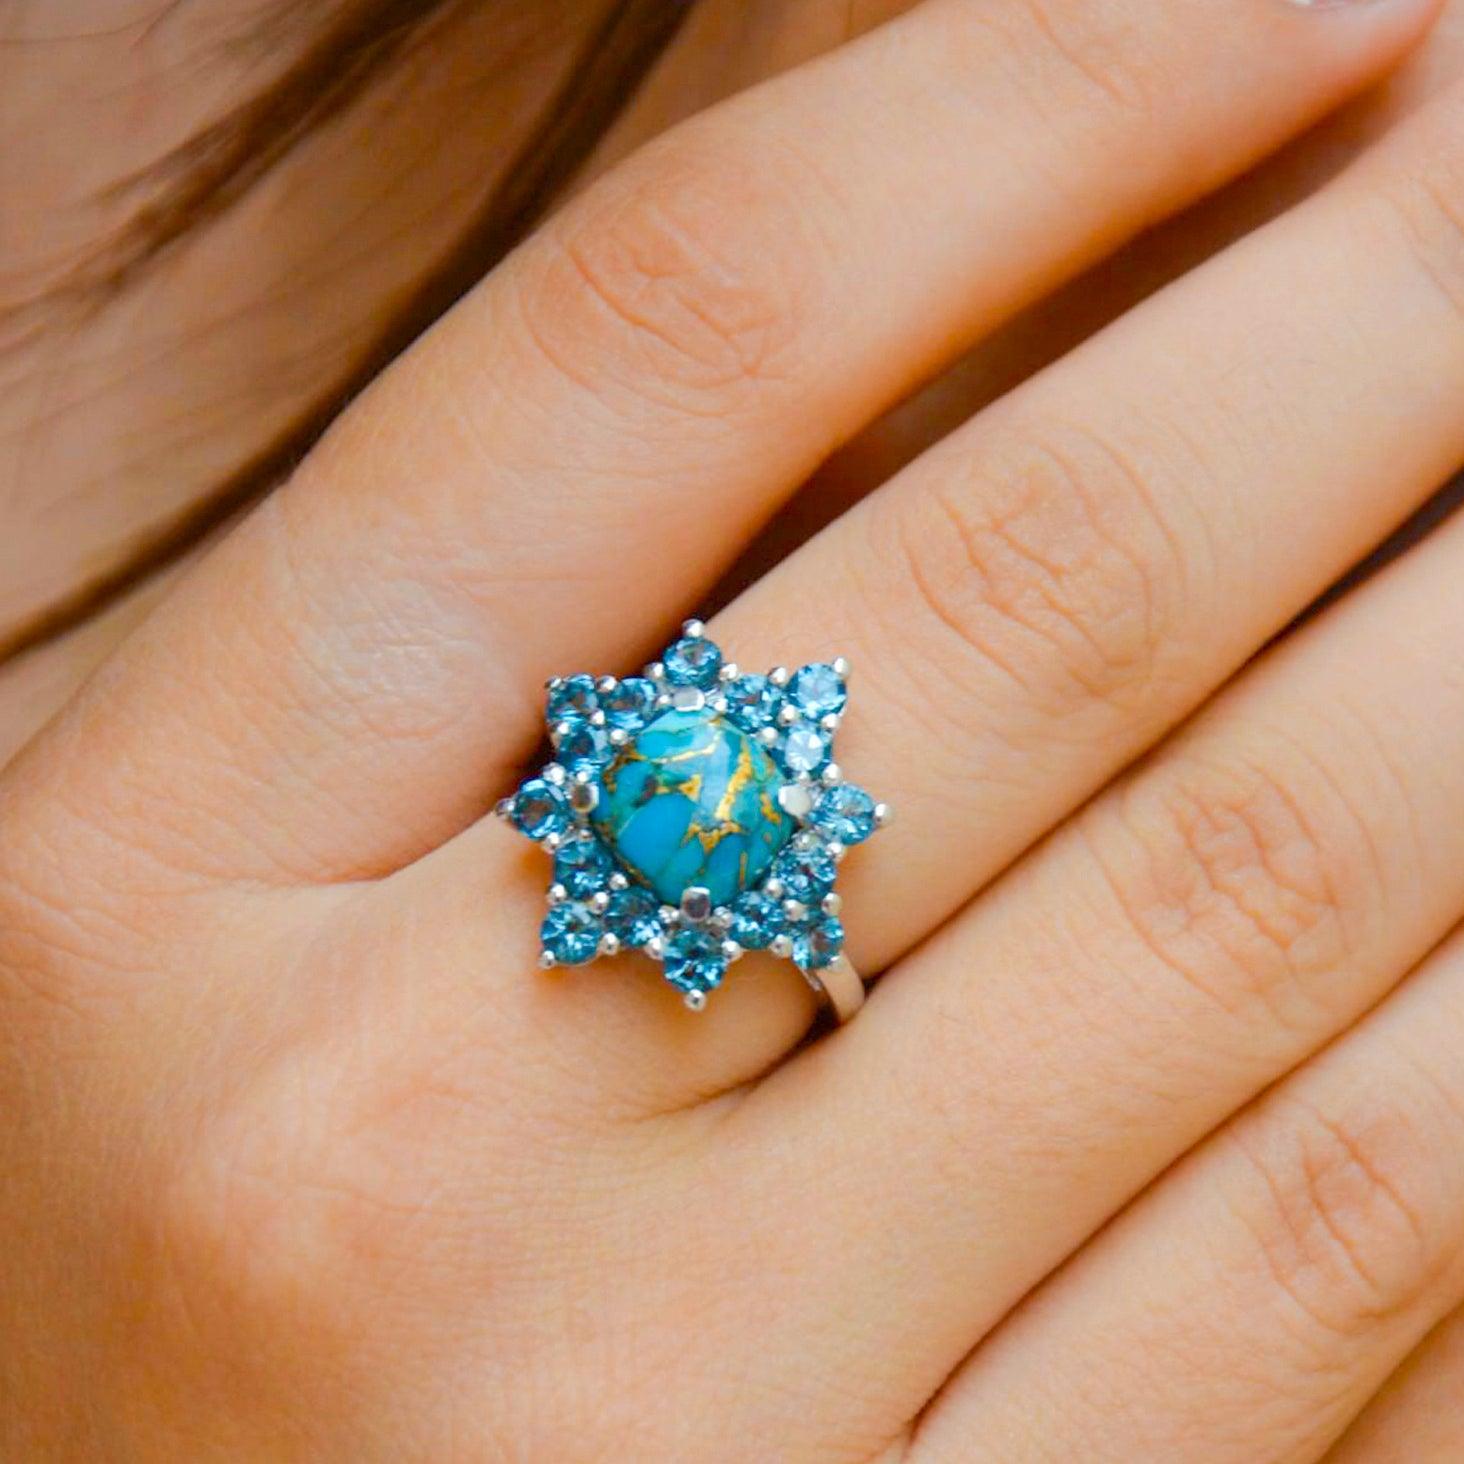 5.40 Ct Blue Copper Turquoise Solid 925 Sterling Silver Cluster Ring Jewelry - YoTreasure